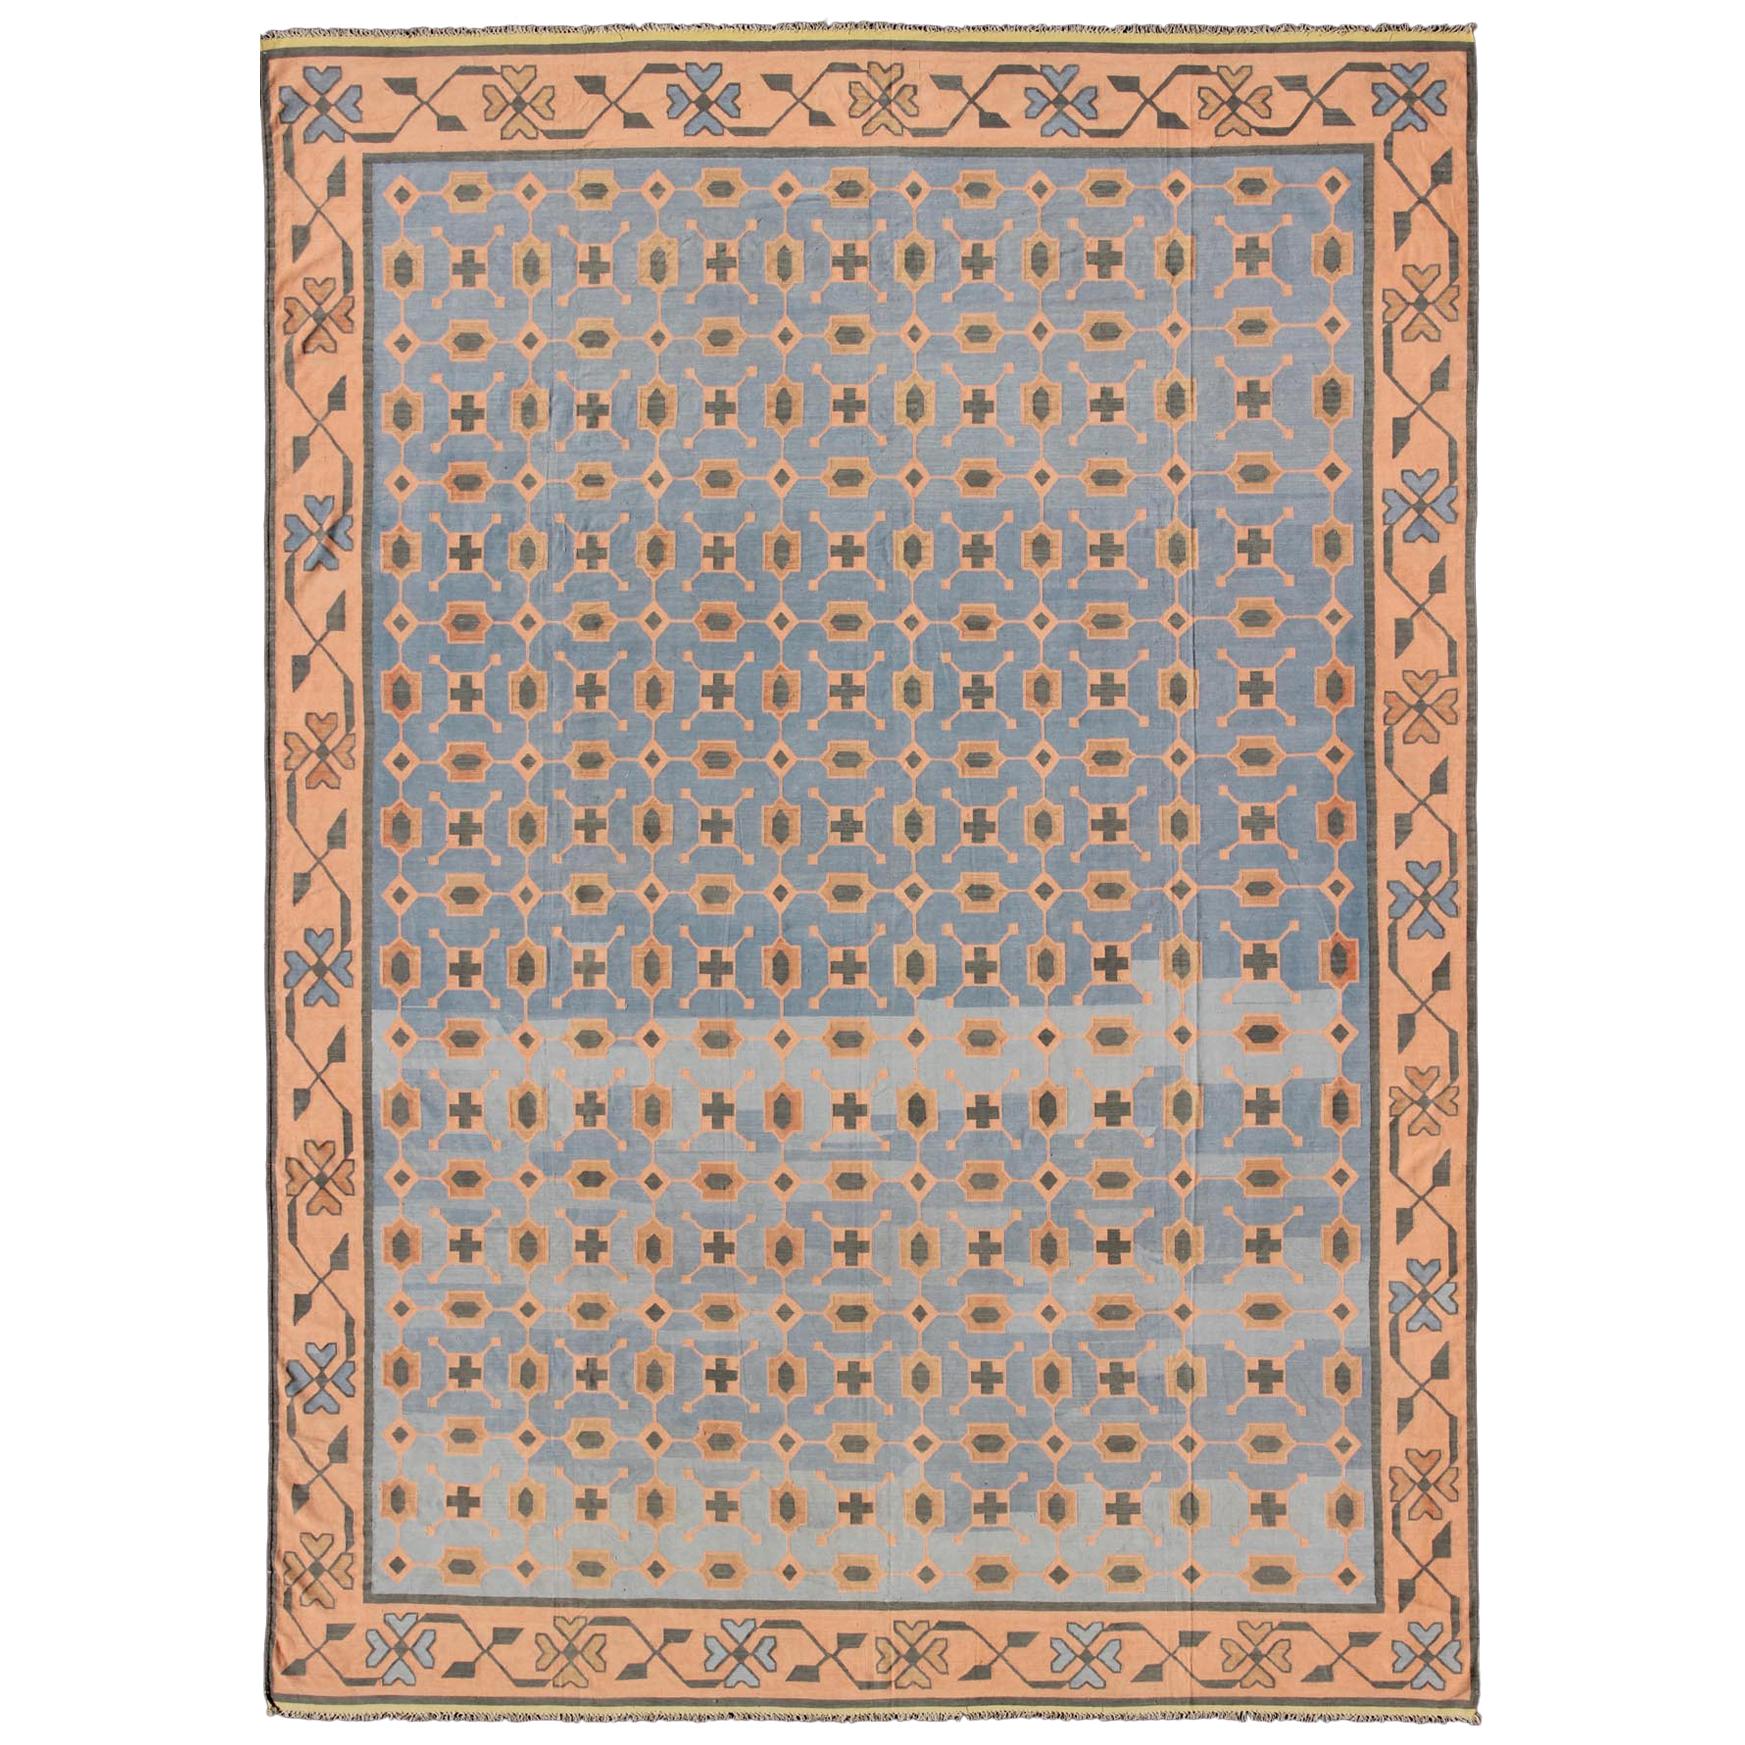 Multicolored Vintage Indian Cotton Dhurrie Rug with All-Over Geometric Design